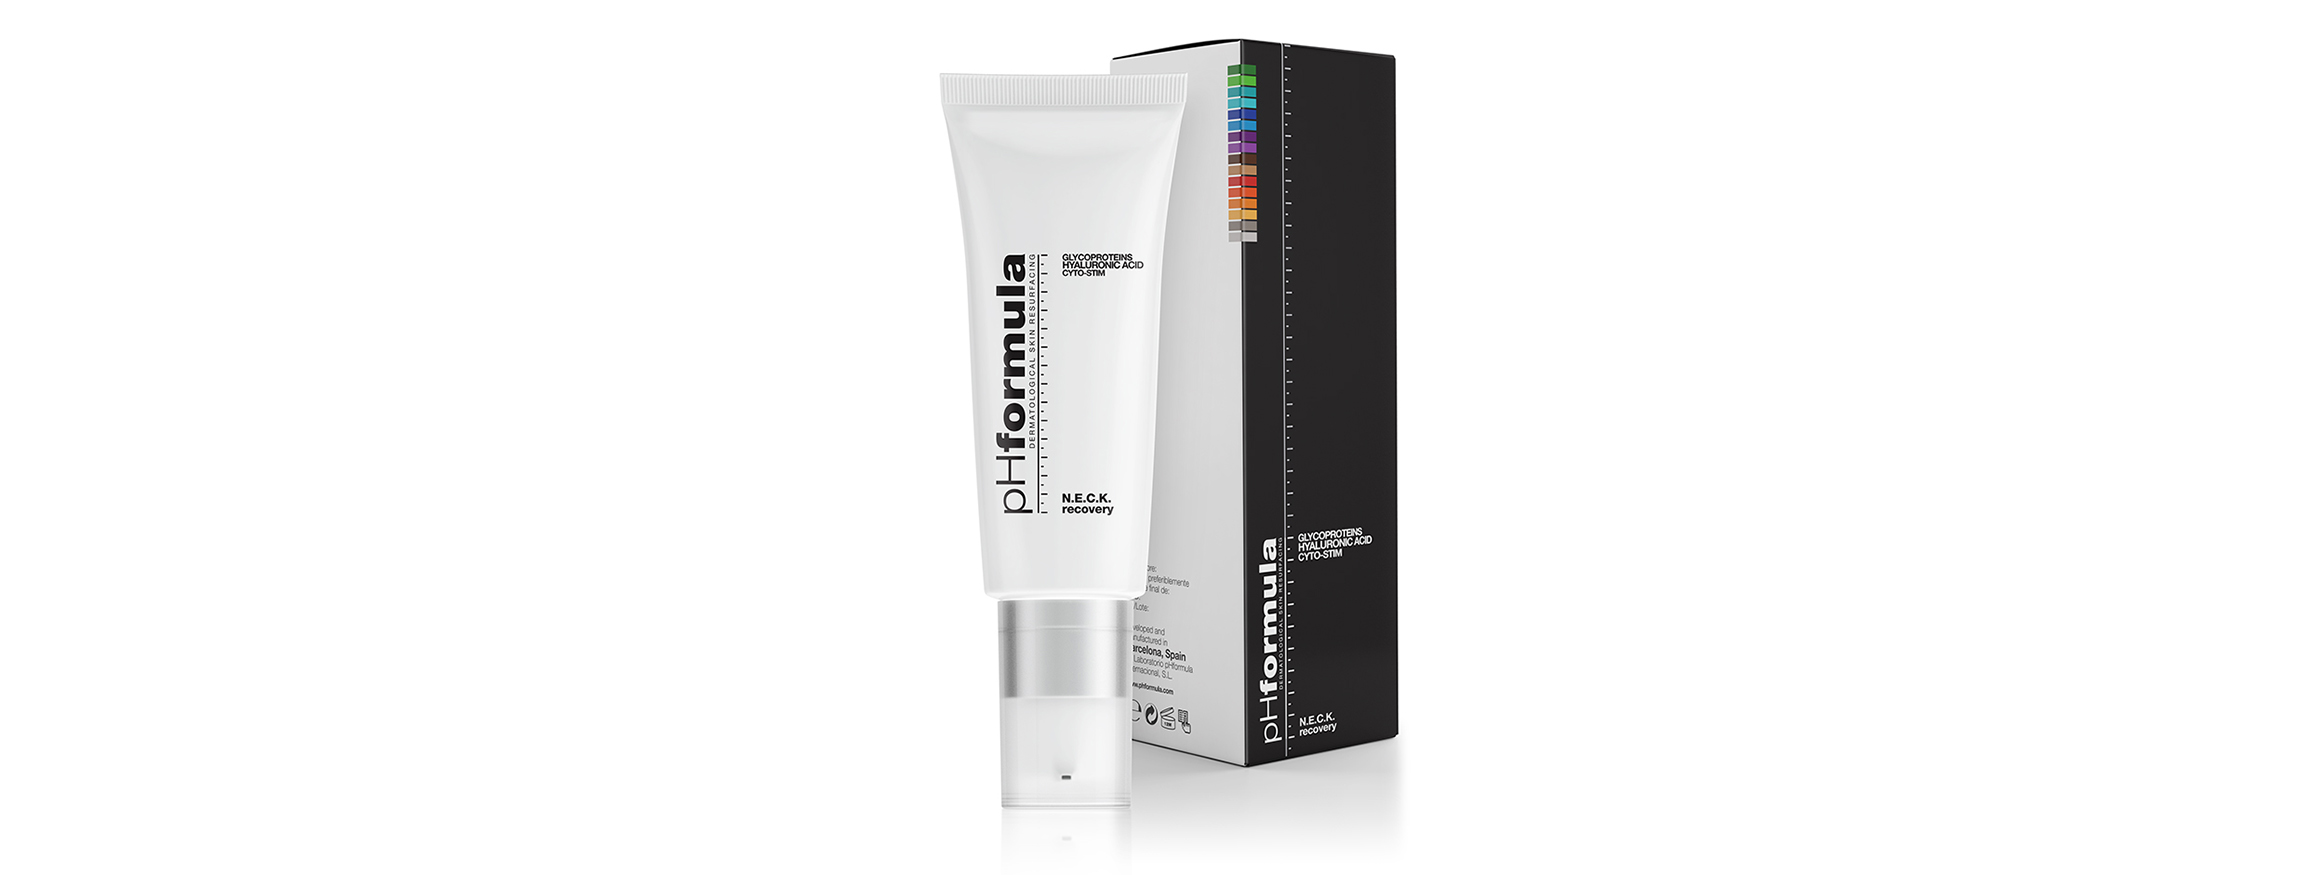 pHformula’s anti-ageing products